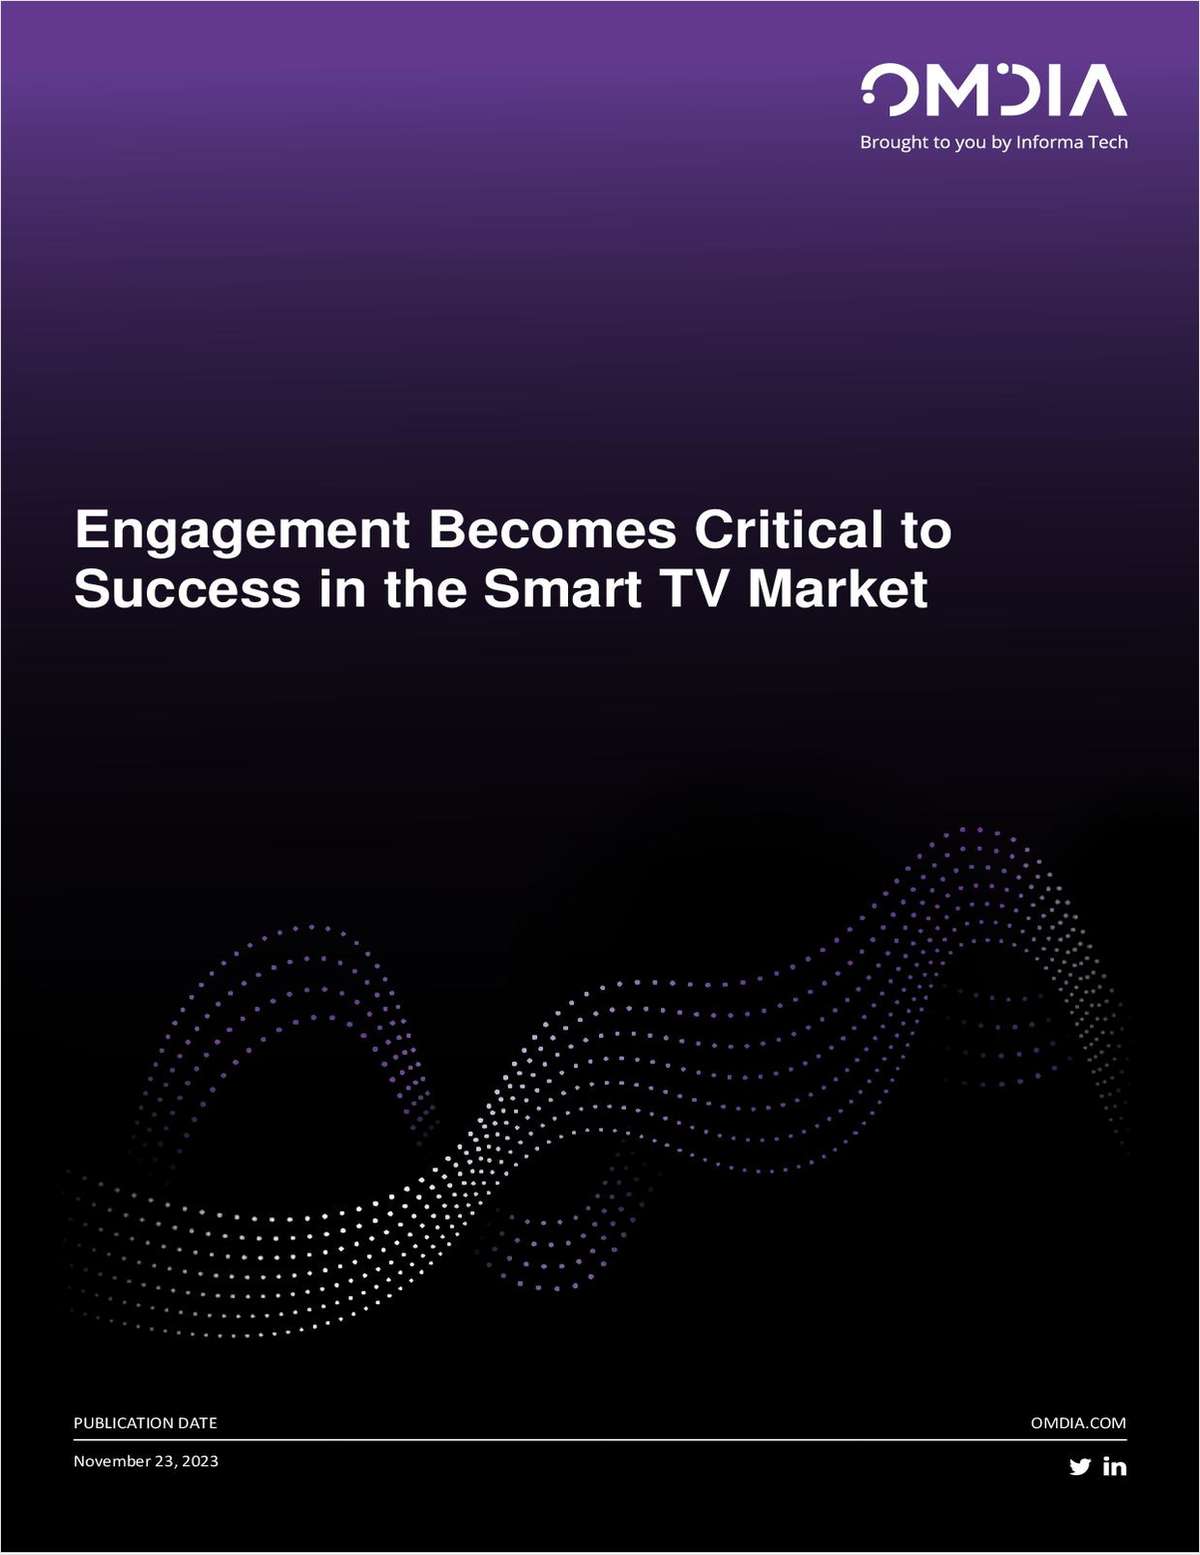 Engagement Becomes Critical to Success in the Smart TV Market